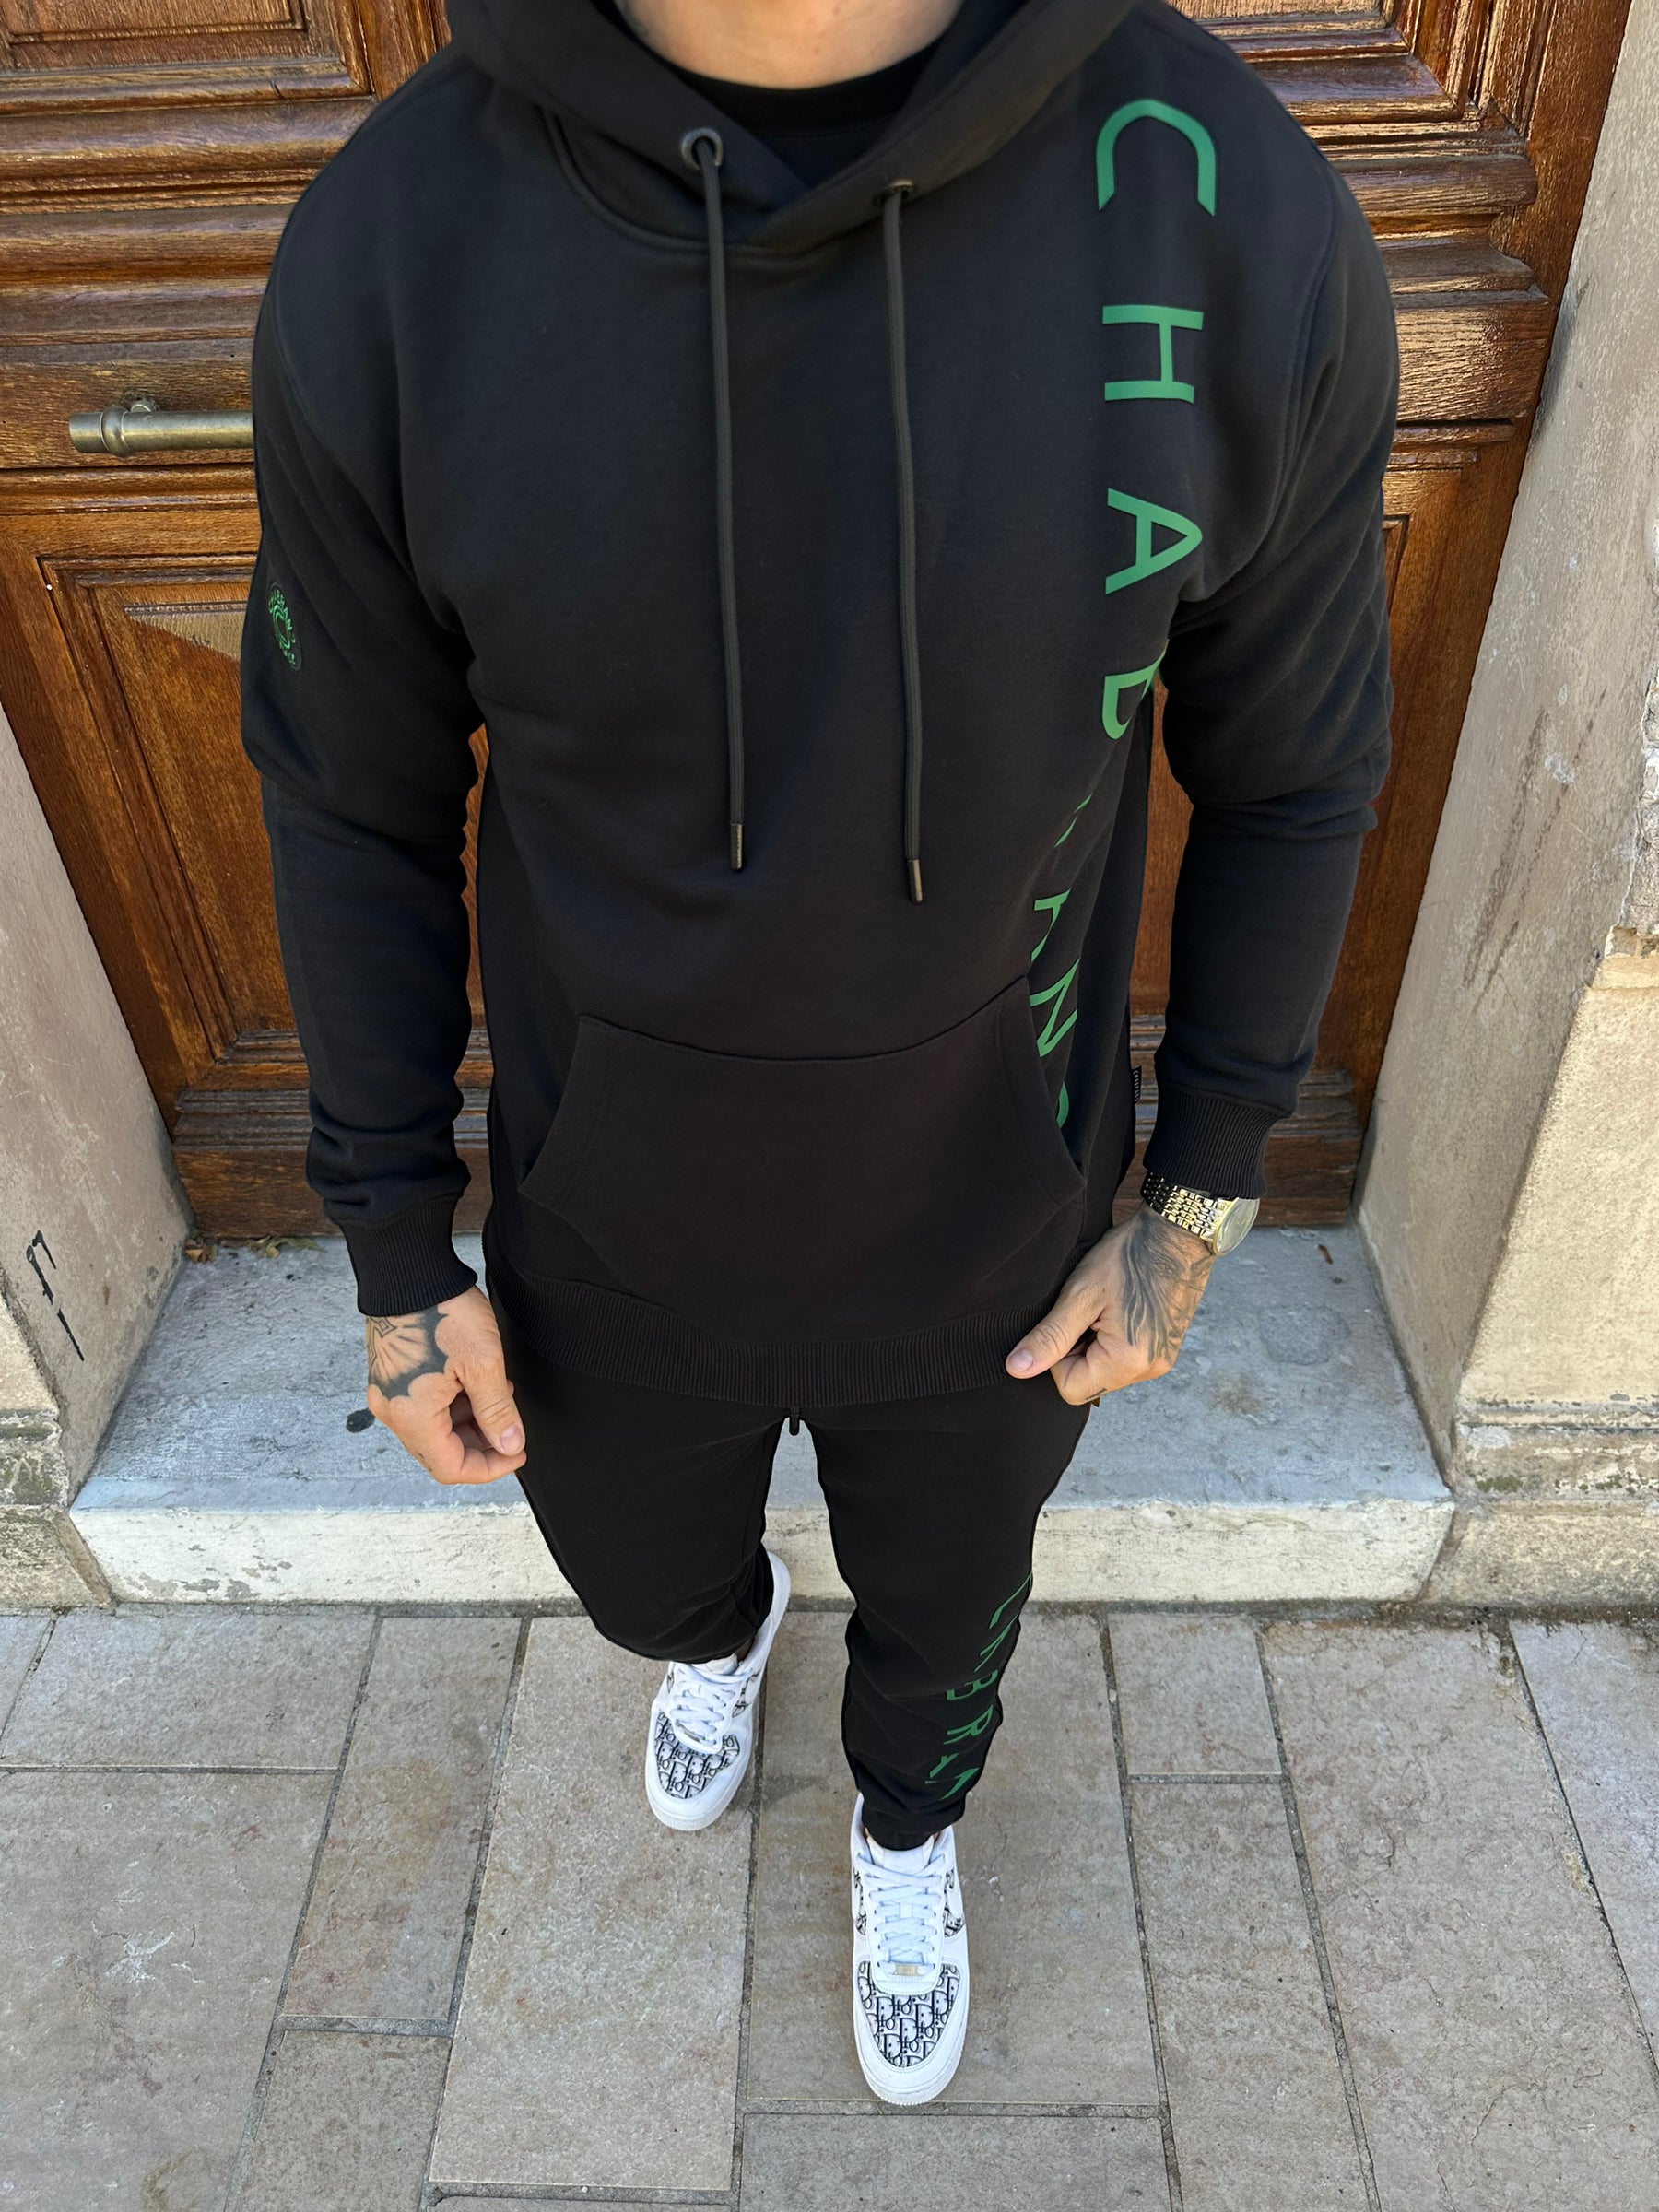 CHABRAND - Black hooded sweatshirt with green sign